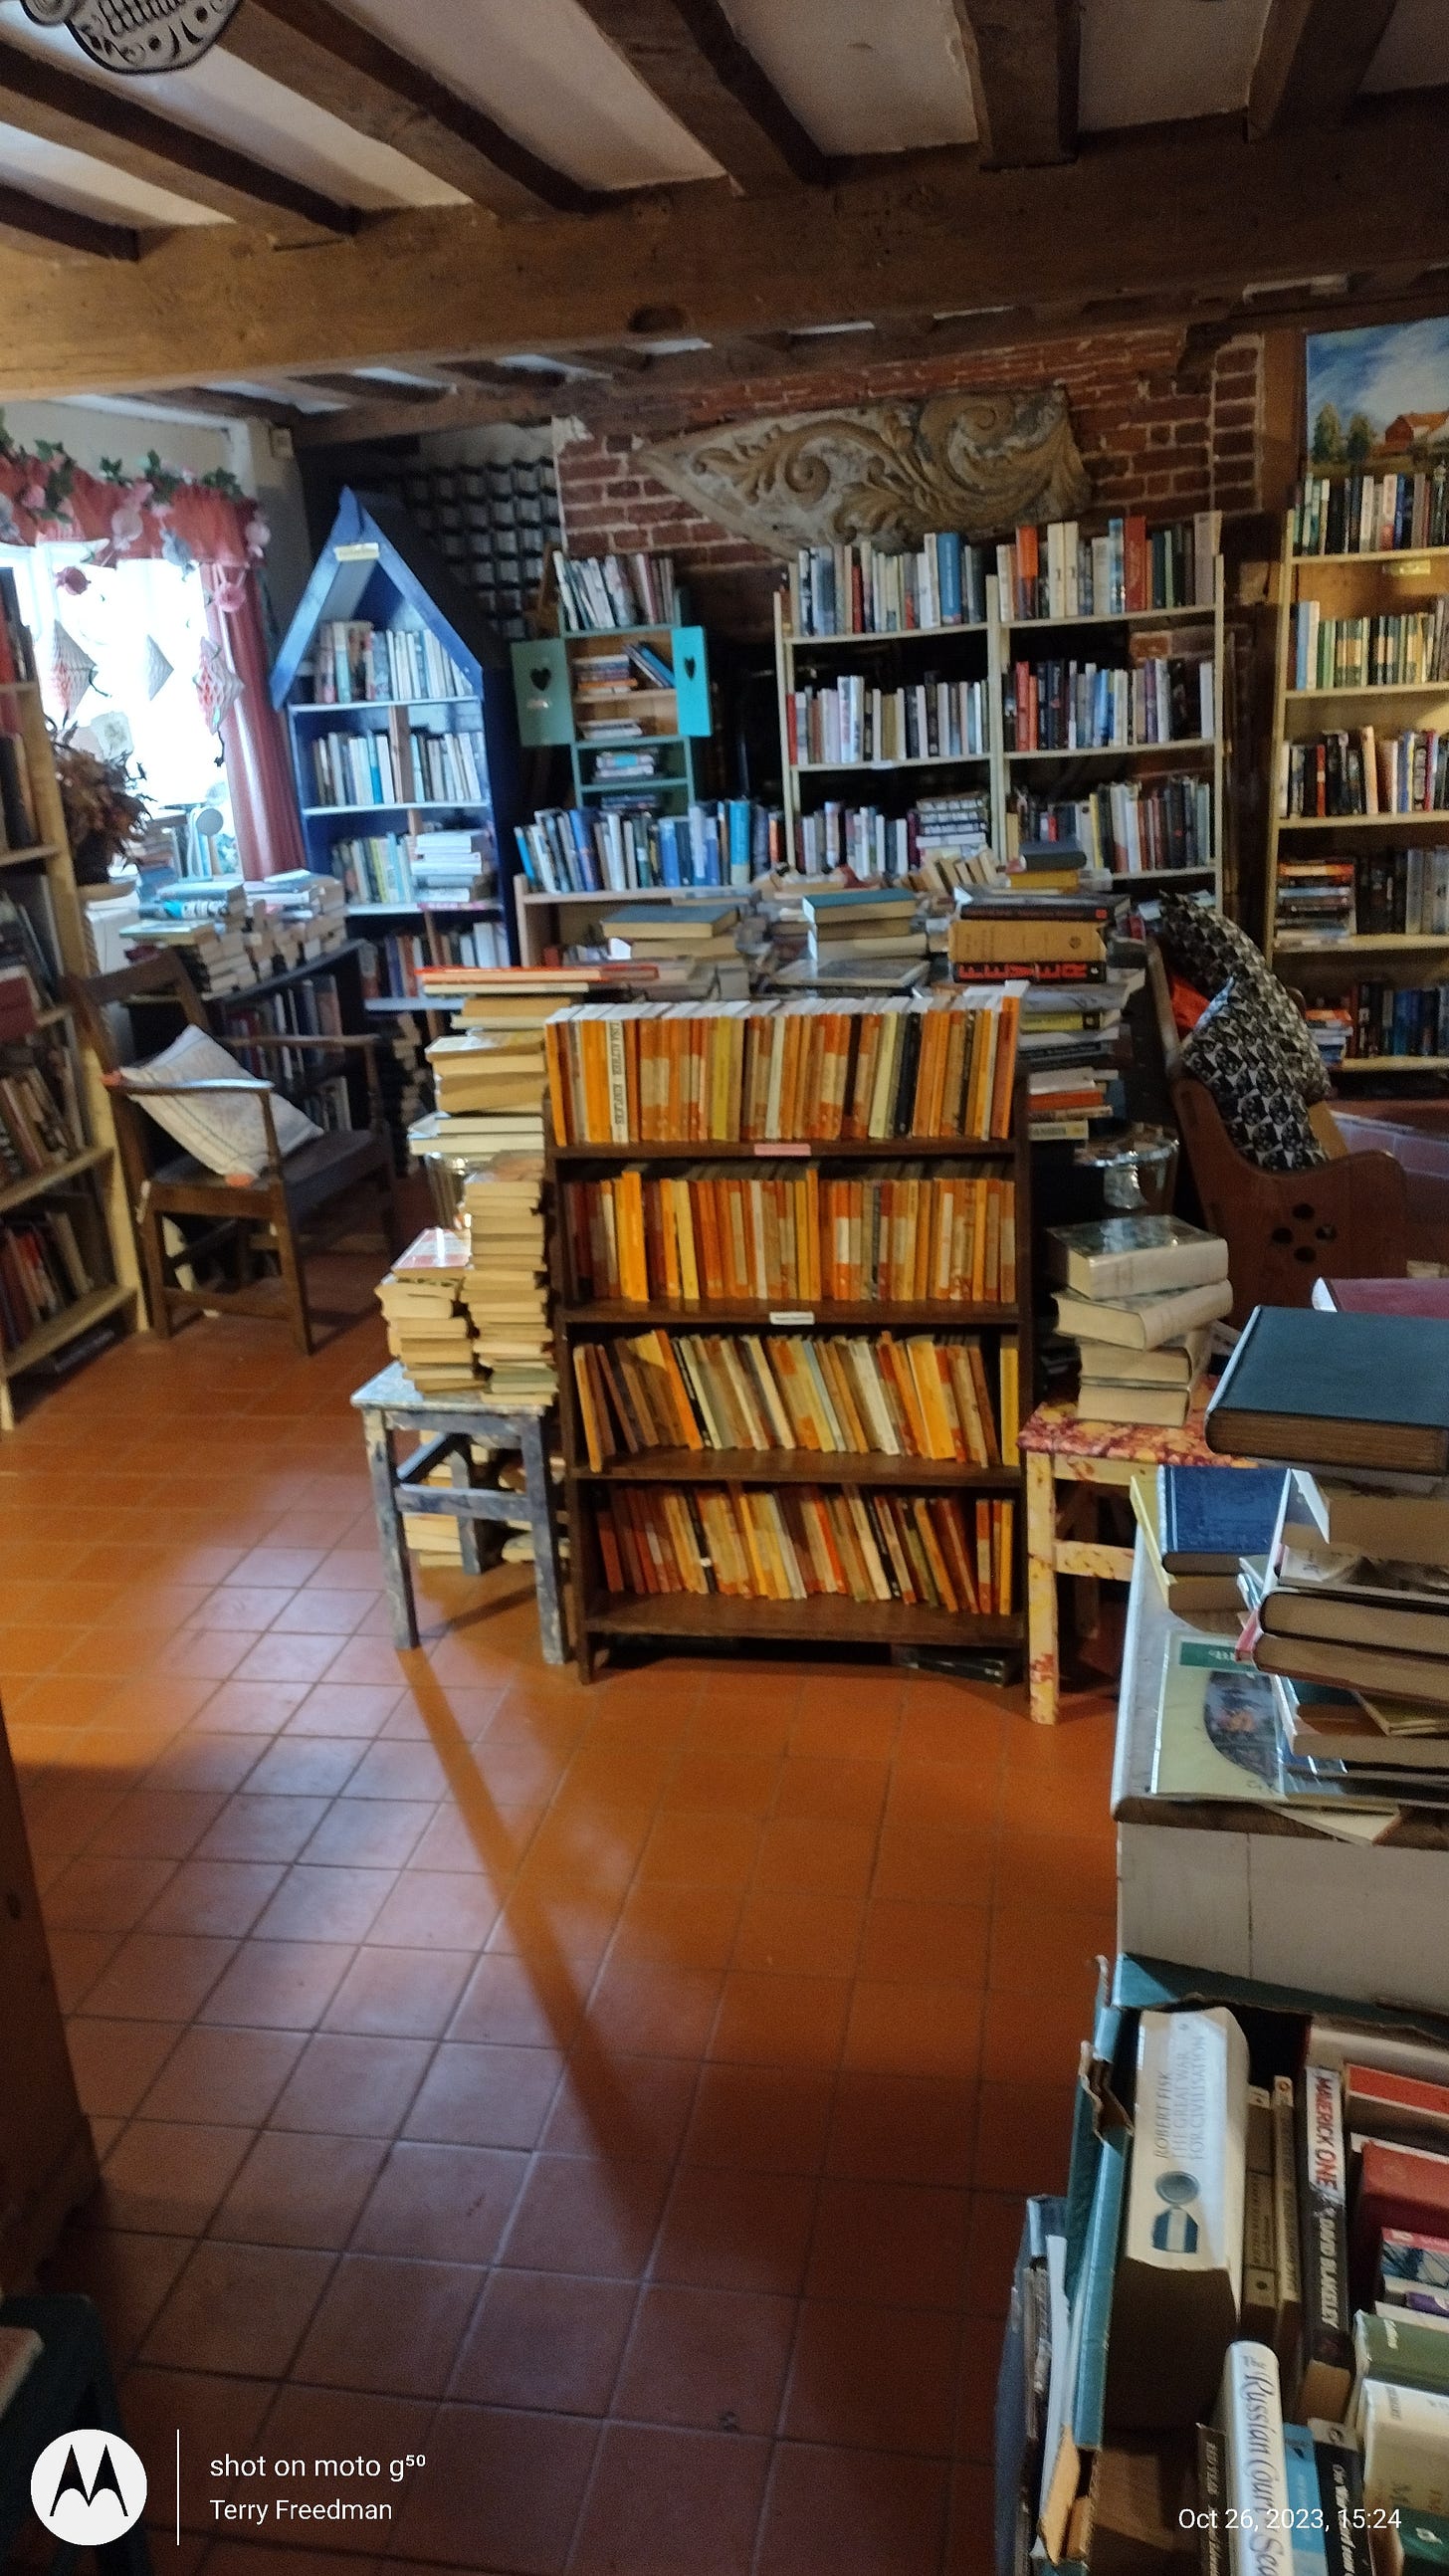 Barnabees Books, photo by Terry Freedman